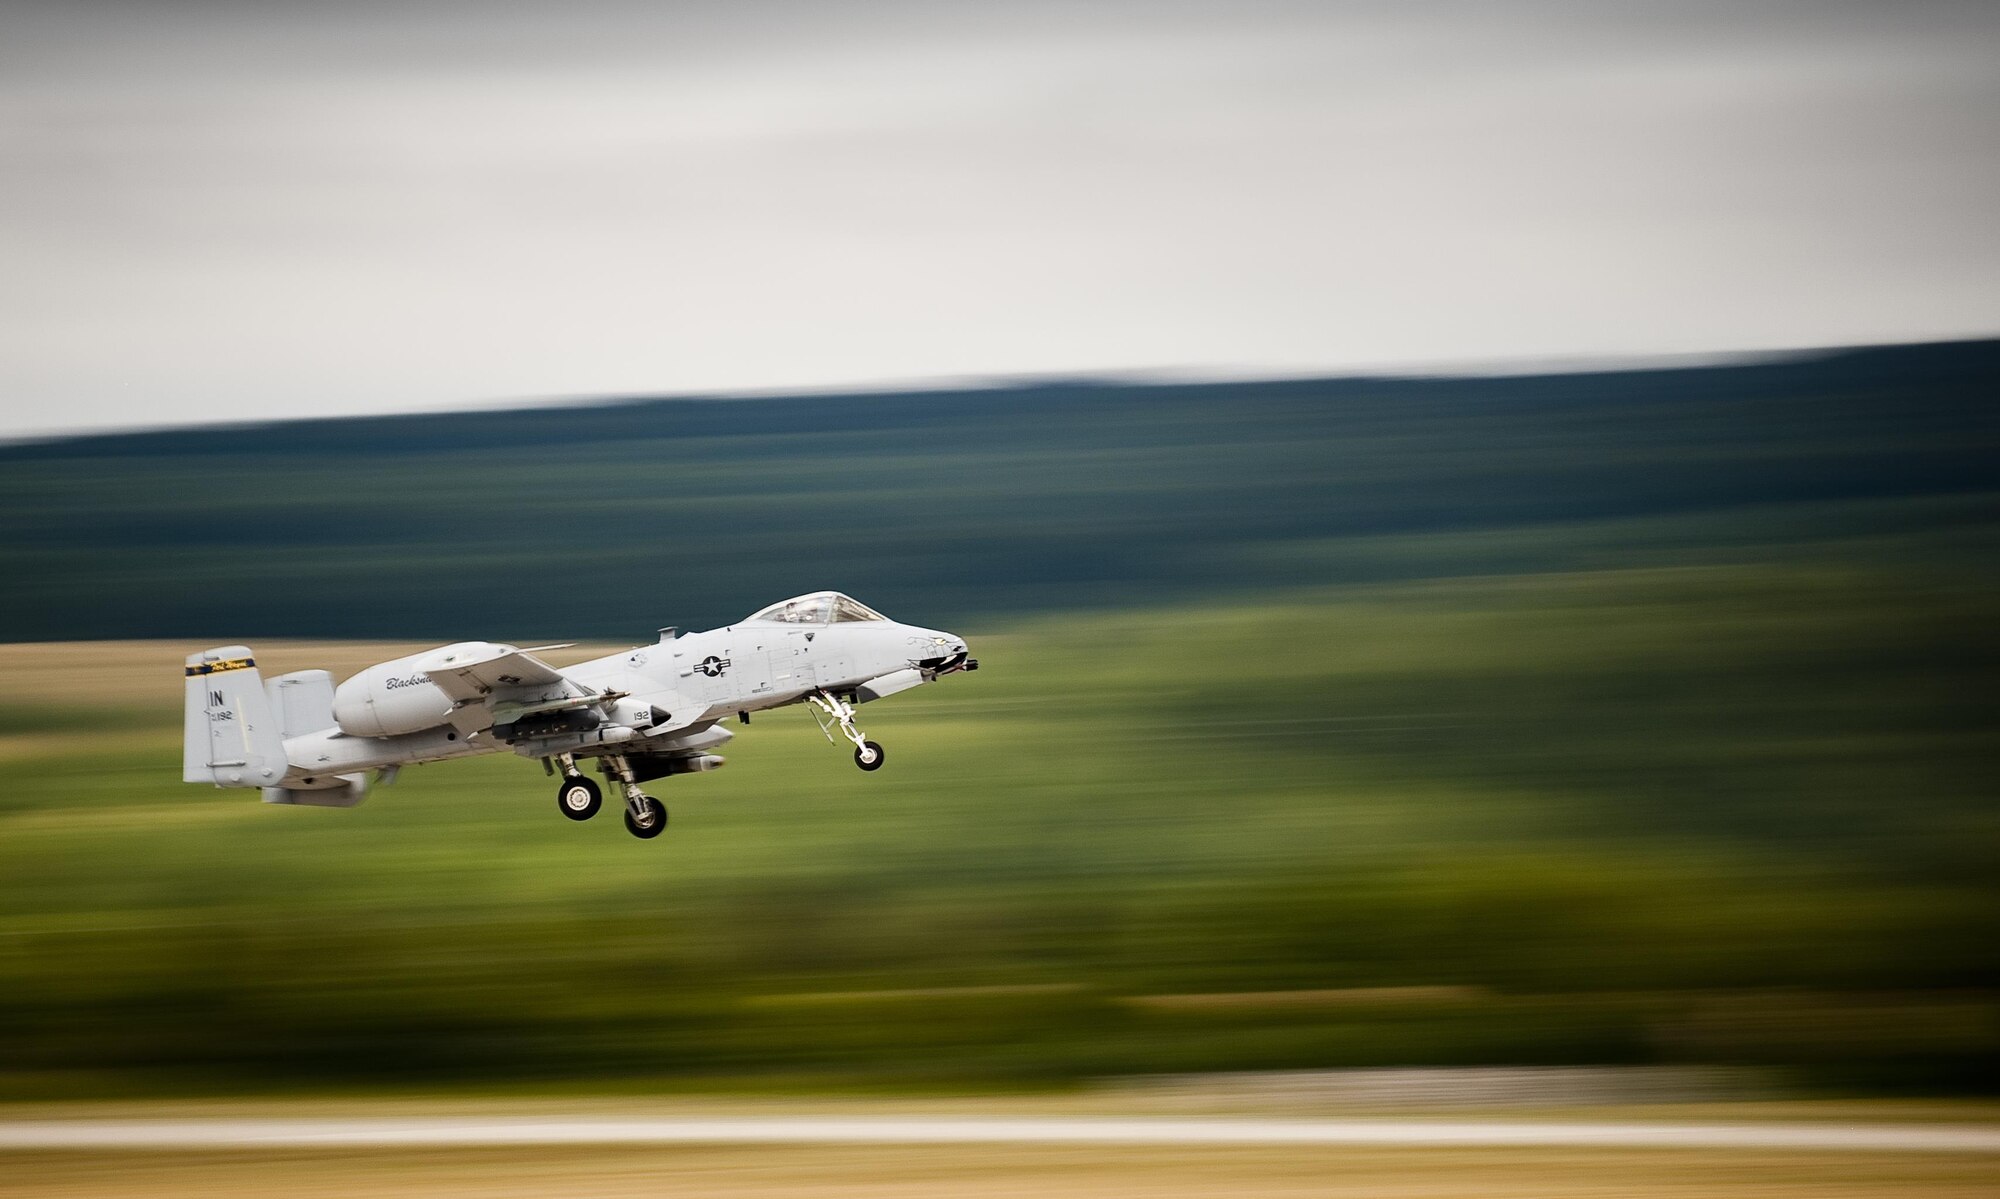 An A-10C Thunderbolt II, from the 163rd Expeditionary Fighter Squadron, takes off during Operation Atlantic Resolve at Sliač Air Base, Slovakia, July 19, 2016. Airmen of the 163rd EFS have been taking part in OAR to conduct training and familiarization events alongside the Slovak armed forces, a NATO ally. The U.S. presence in Europe and the relationships built over the past 70 years provide strategic access critical to meet the nation’s NATO commitment to respond to threats against our allies and partners. (U.S. Air National Guard photo/Staff Sgt. William Hopper)                                      